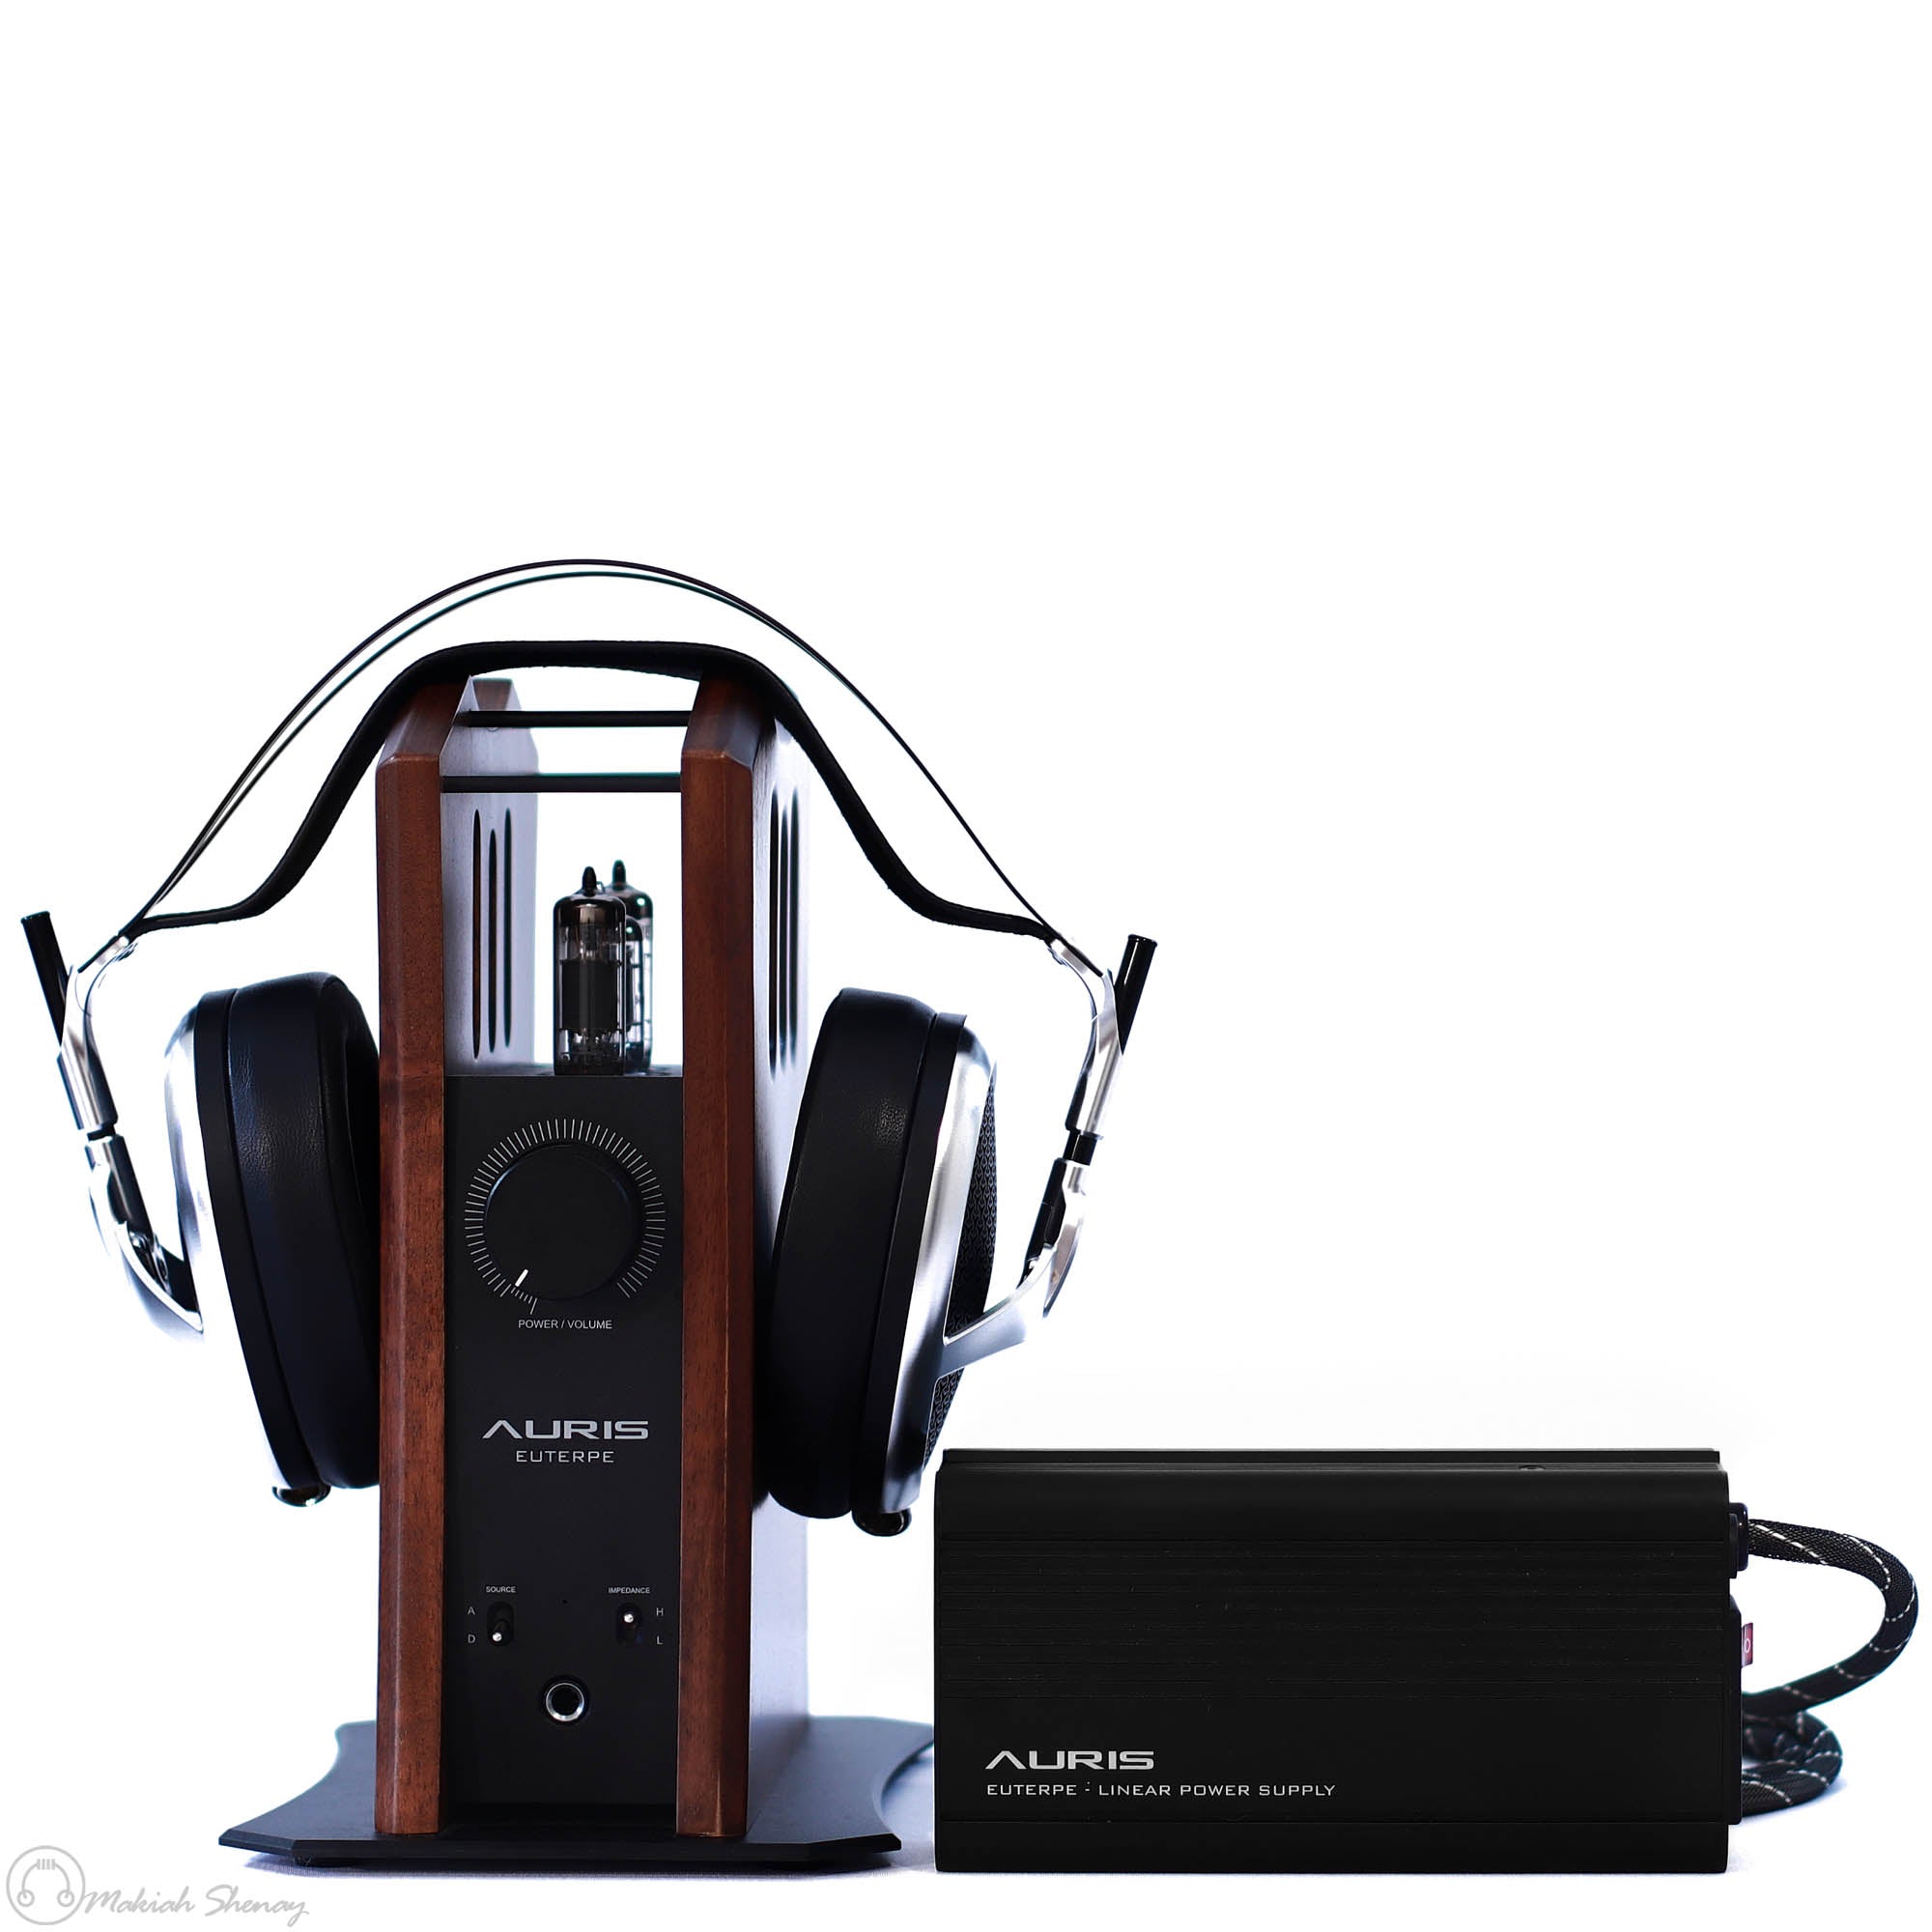 Transcending PC Audio - All In with the Auris Euterpe